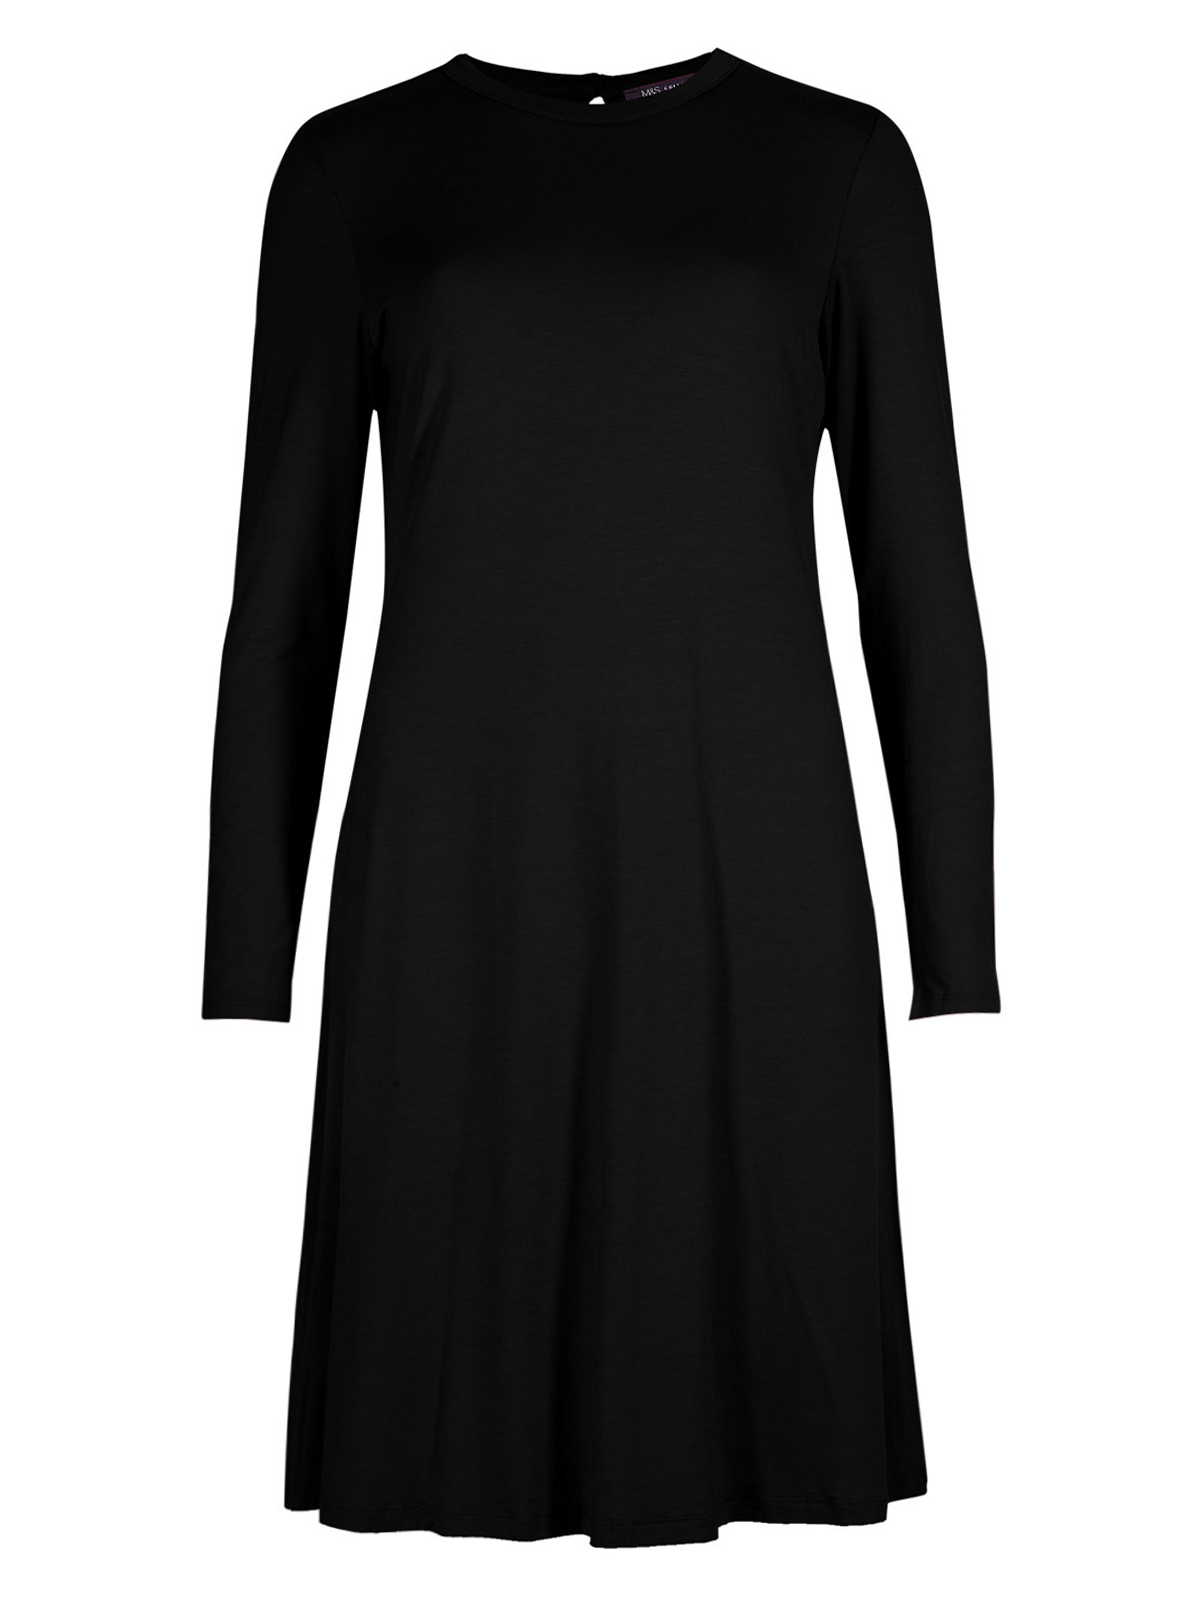 Marks and Spencer - - M&5 BLACK Long Sleeve Swing Dress - Size 8 to 20 ...